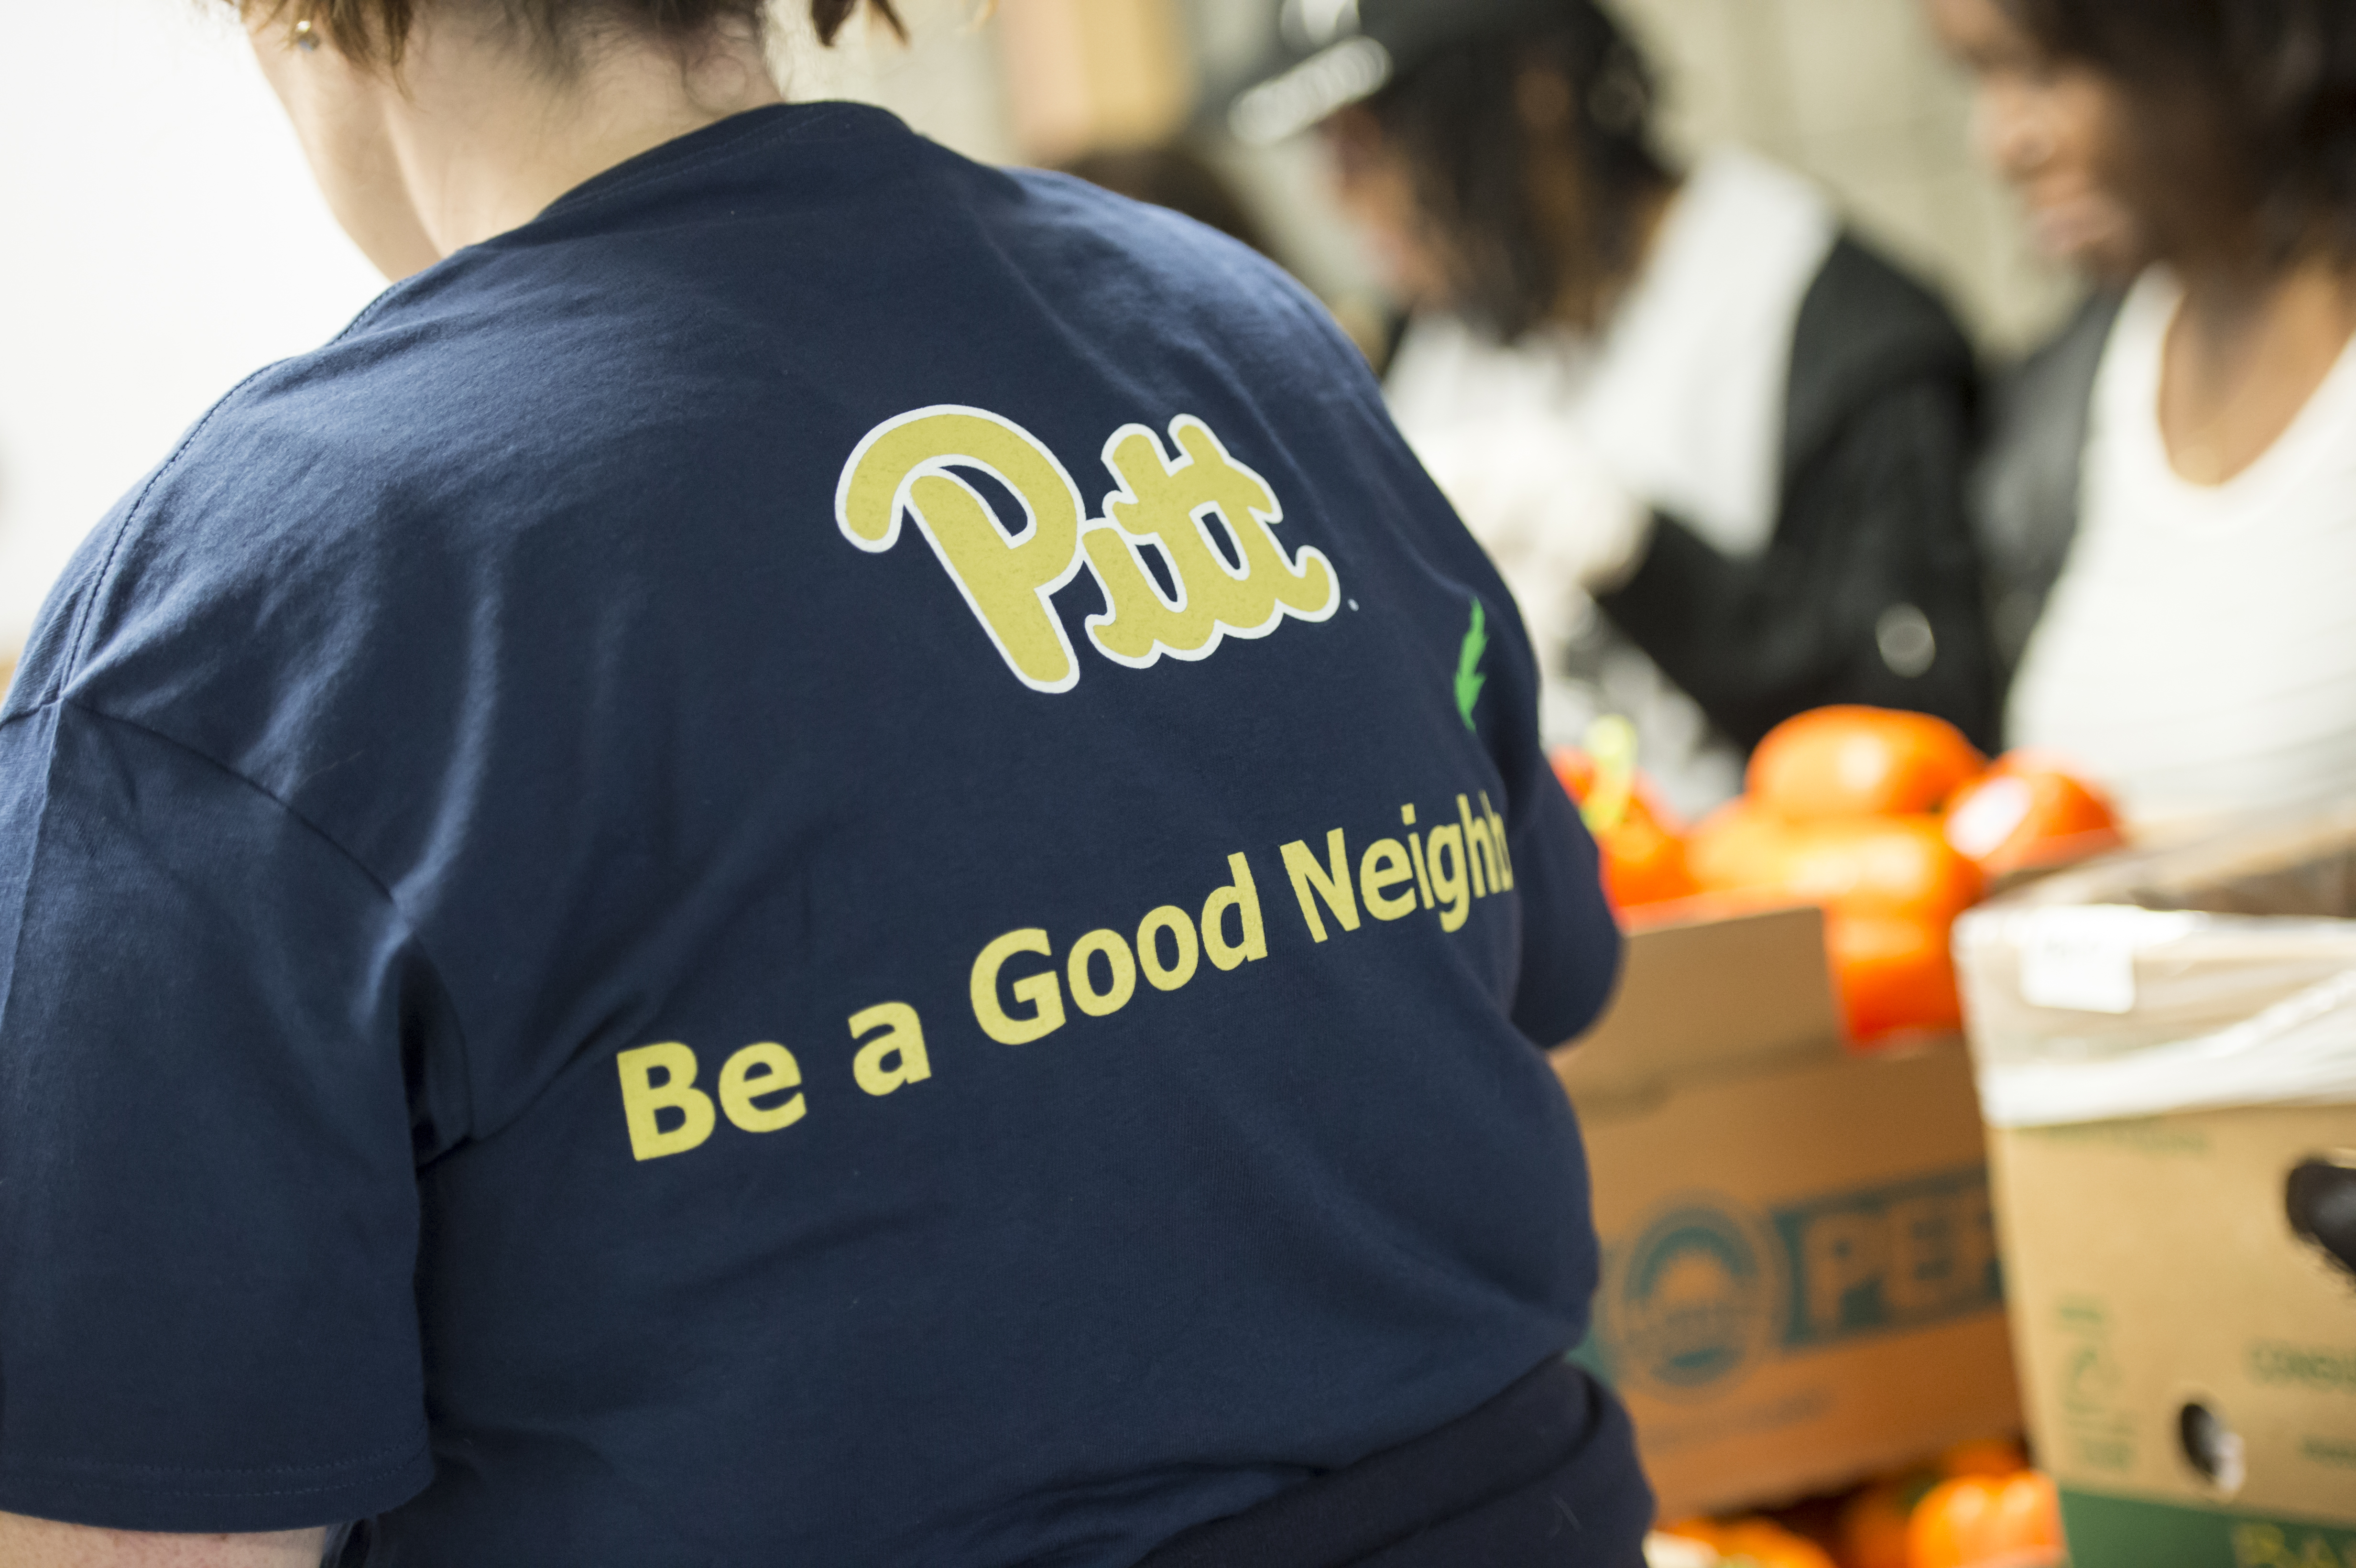 Back of a person wearing a blue t-shirt that says "Pitt Be a Good Neighbor"